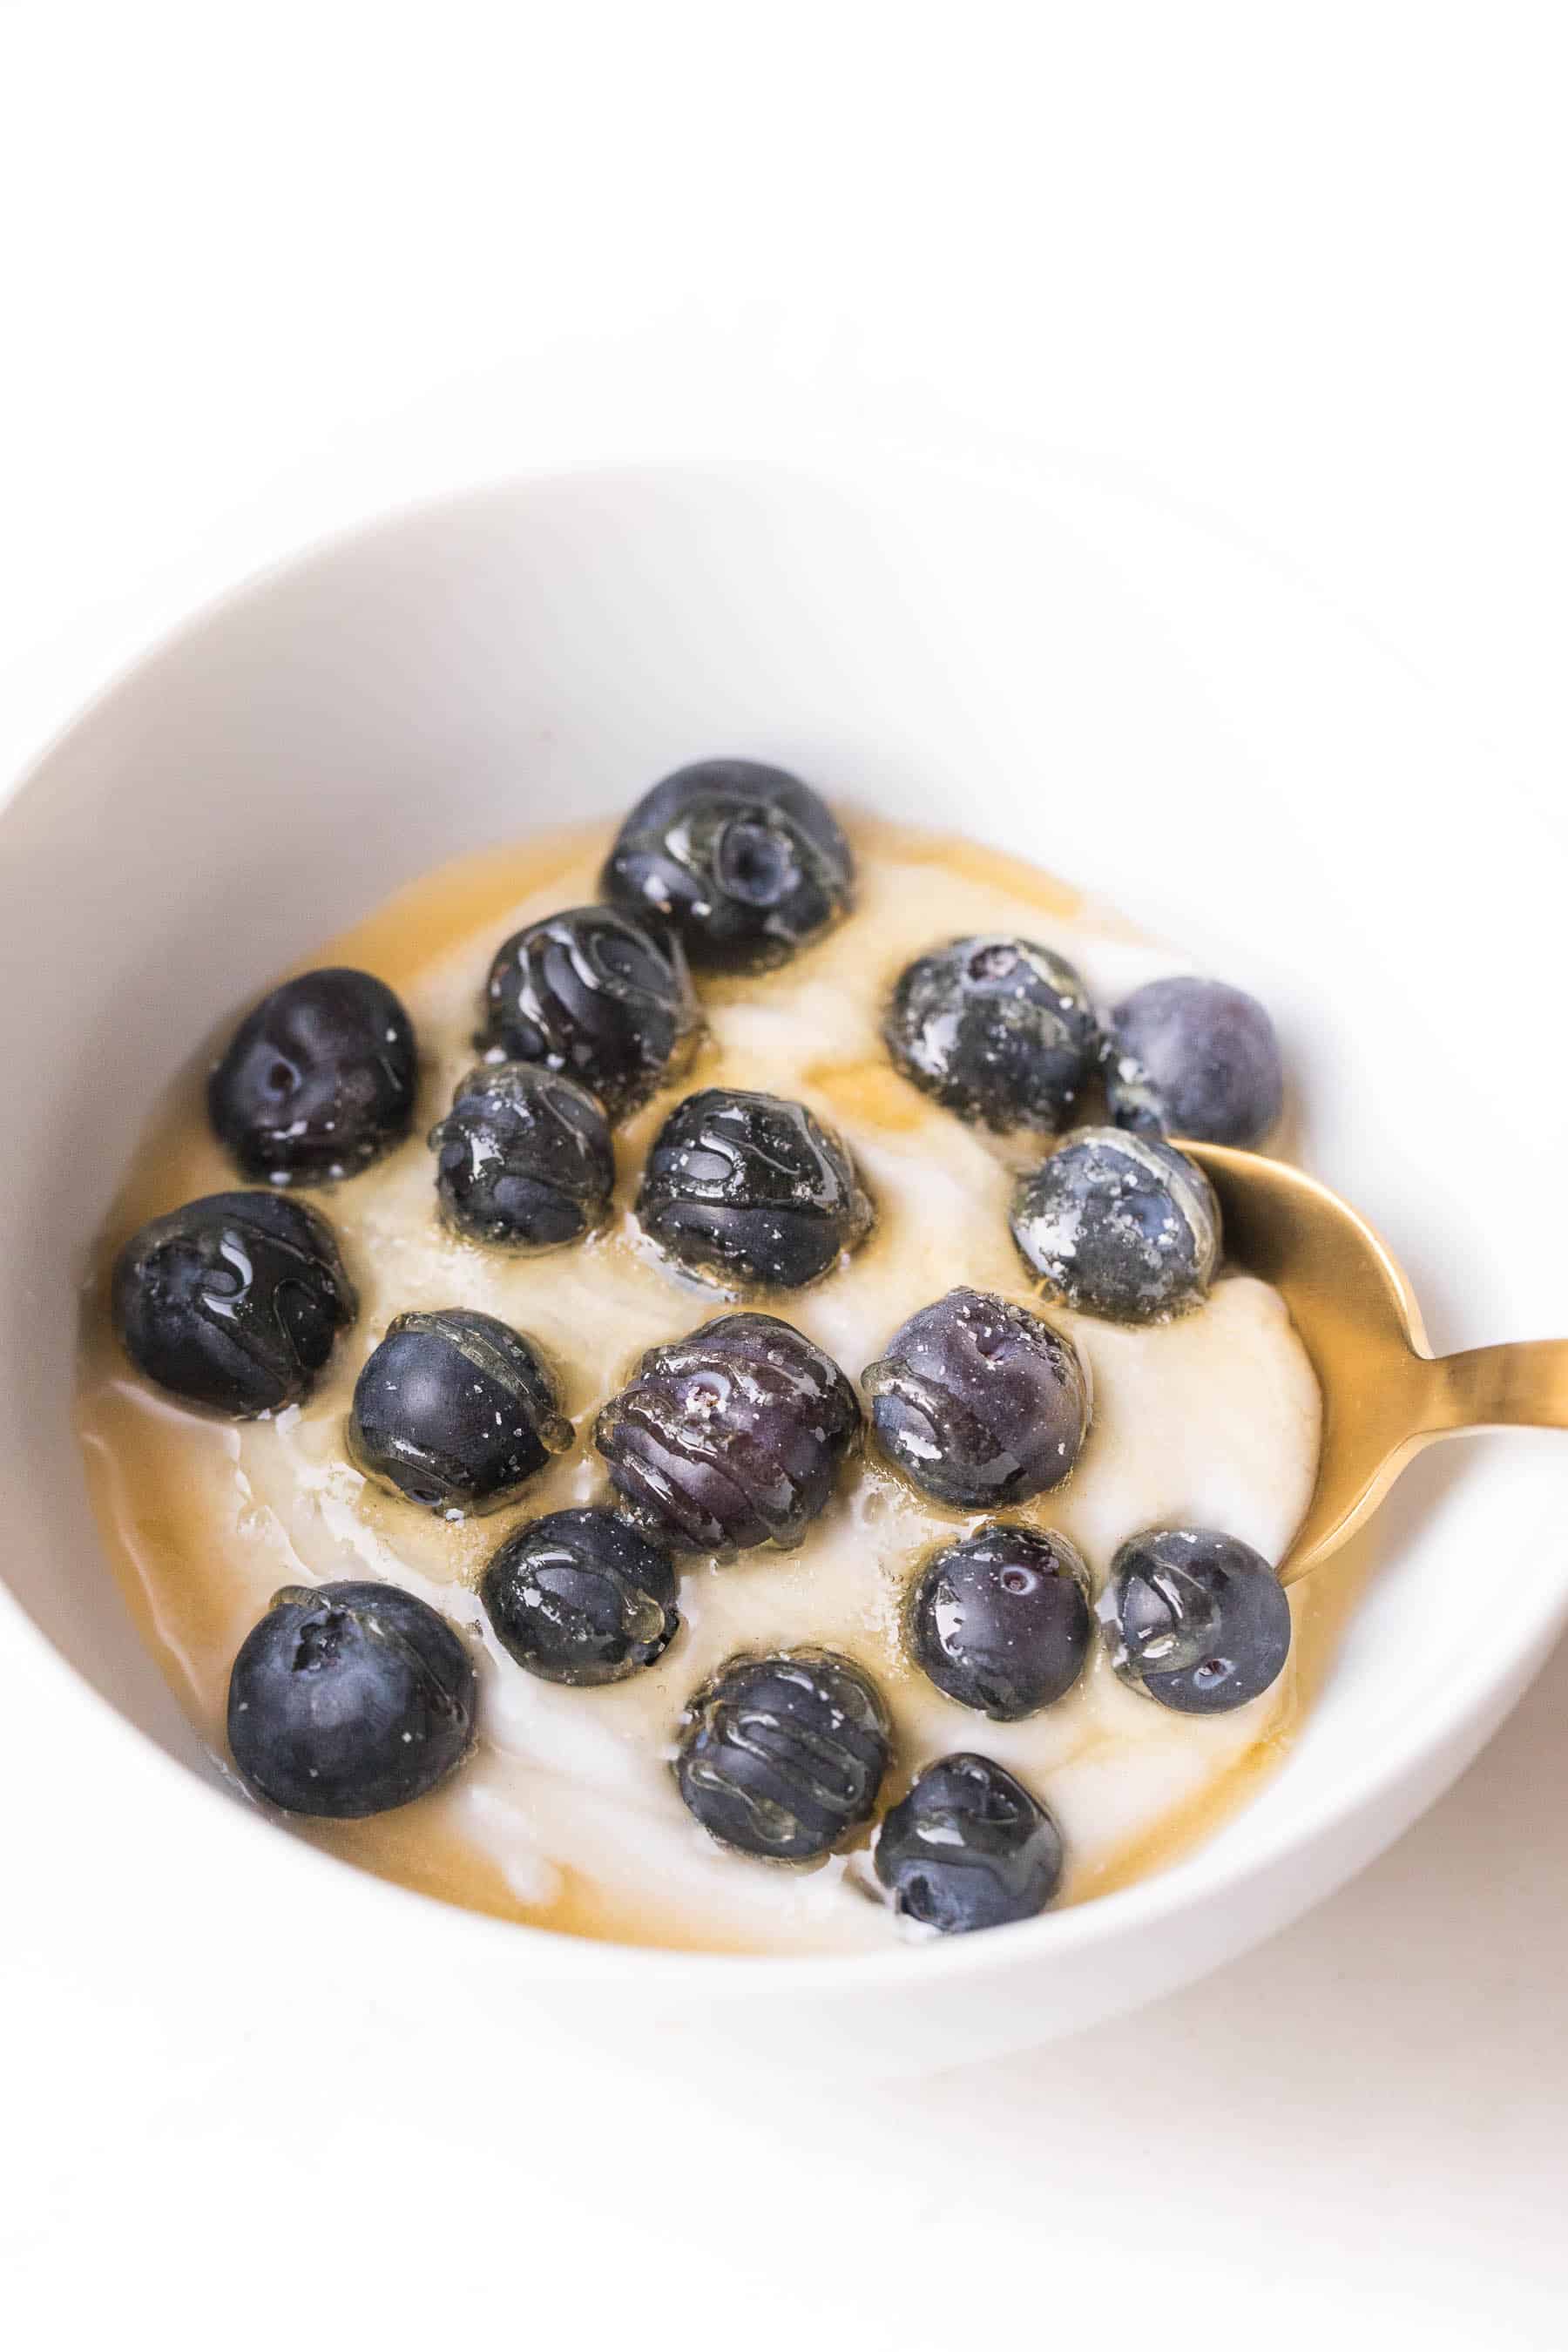 white bowl on a white background with coconut whipped cream, blueberries and honey